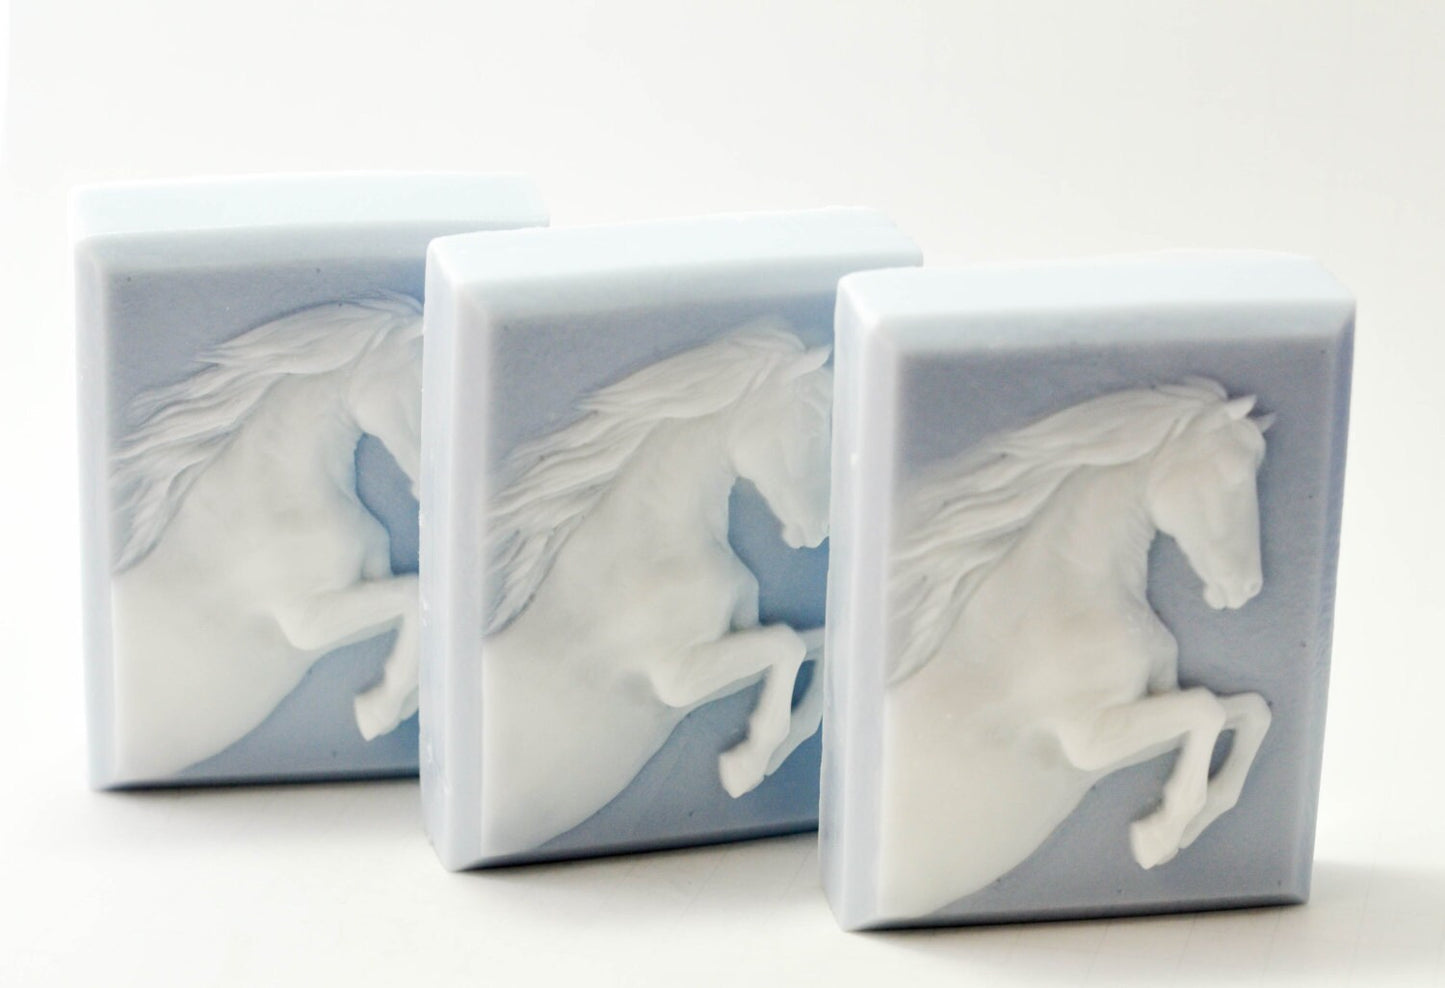 Rearing Horse glycerin soap, handmade soap, equestrian soap, equestrian gift, party favor